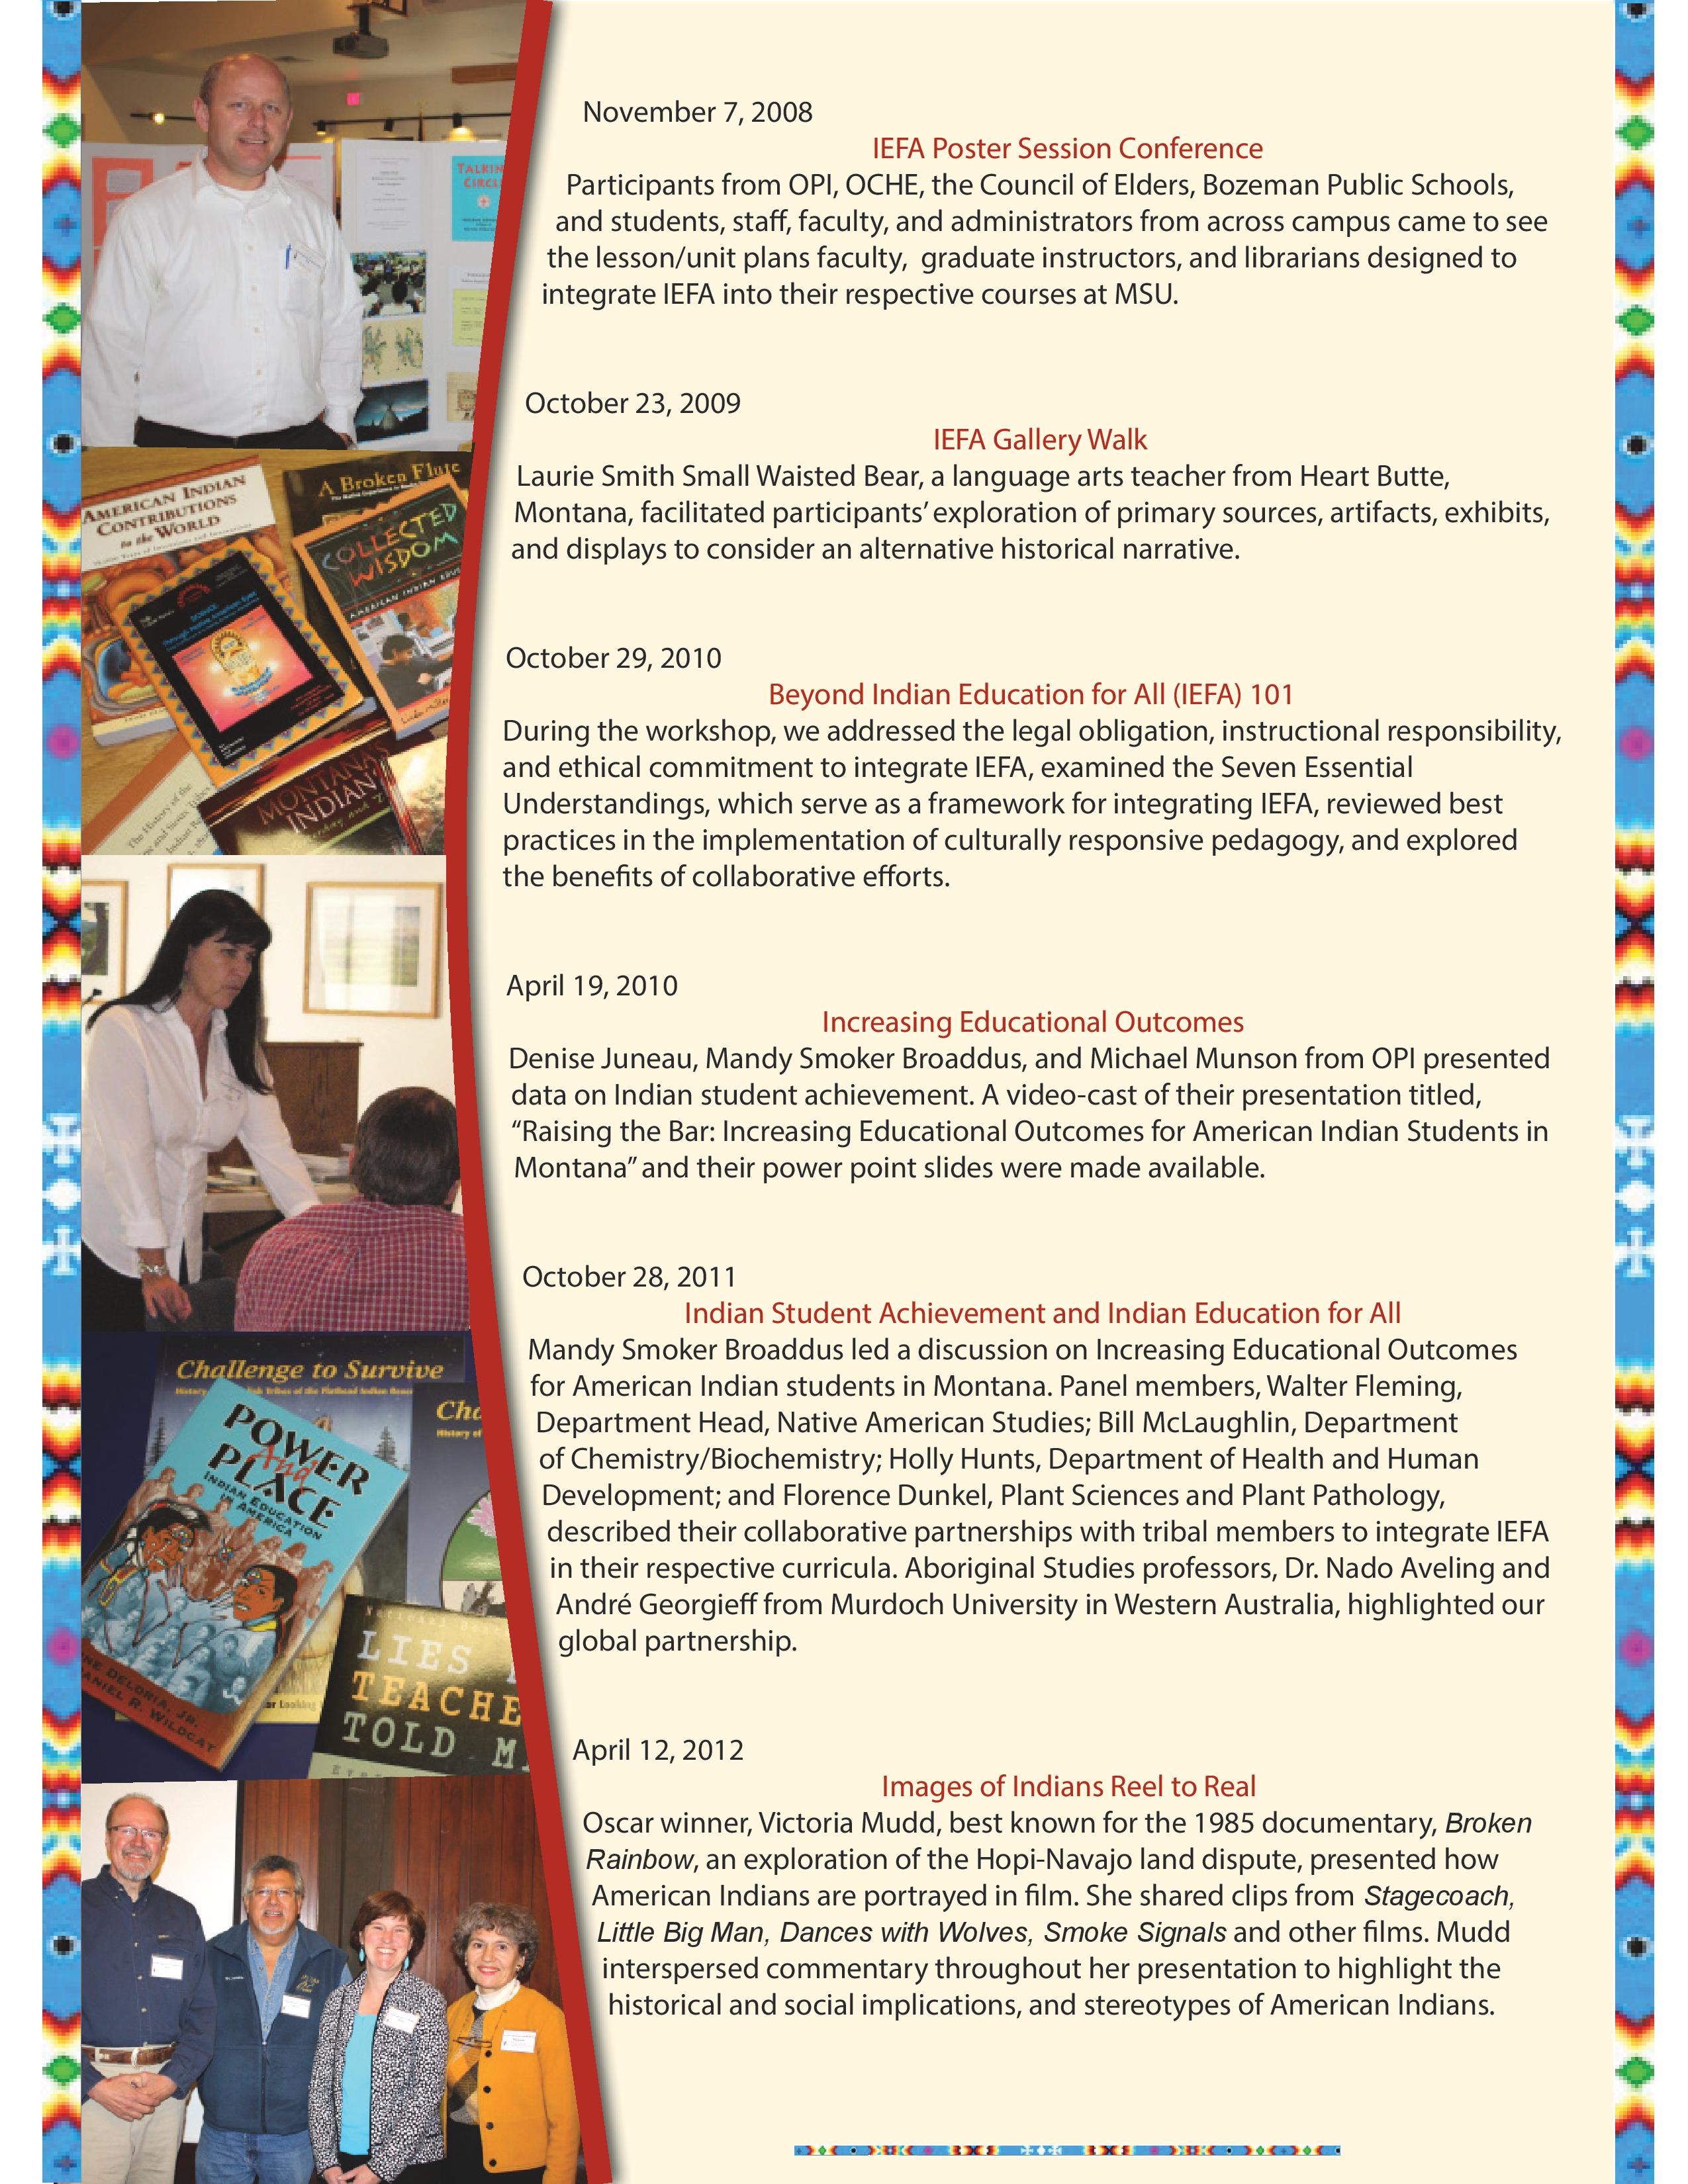 Indian education for all professonal development flyer part 2. Click on part 1 to download PDF